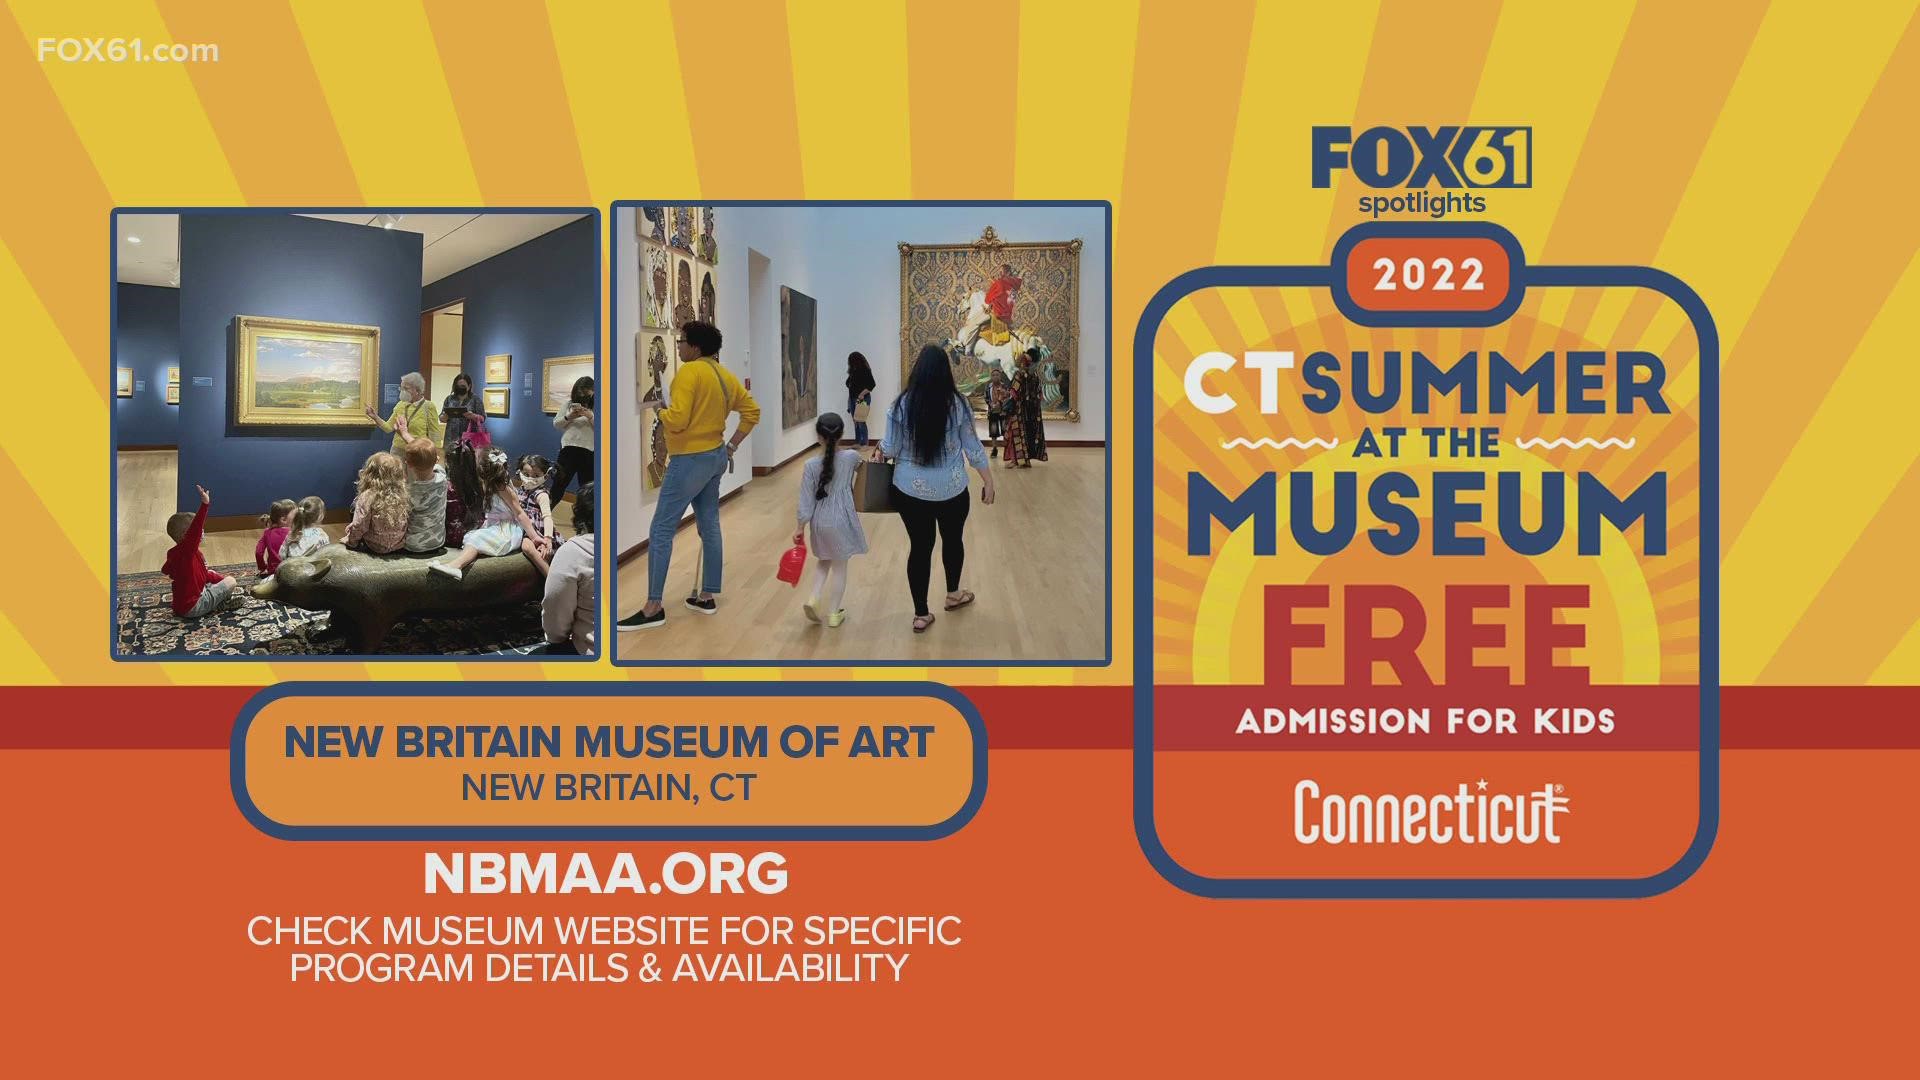 Now through Sept. 5, Connecticut children age 18 and under plus one accompanying adult can visit participating museums free of charge.